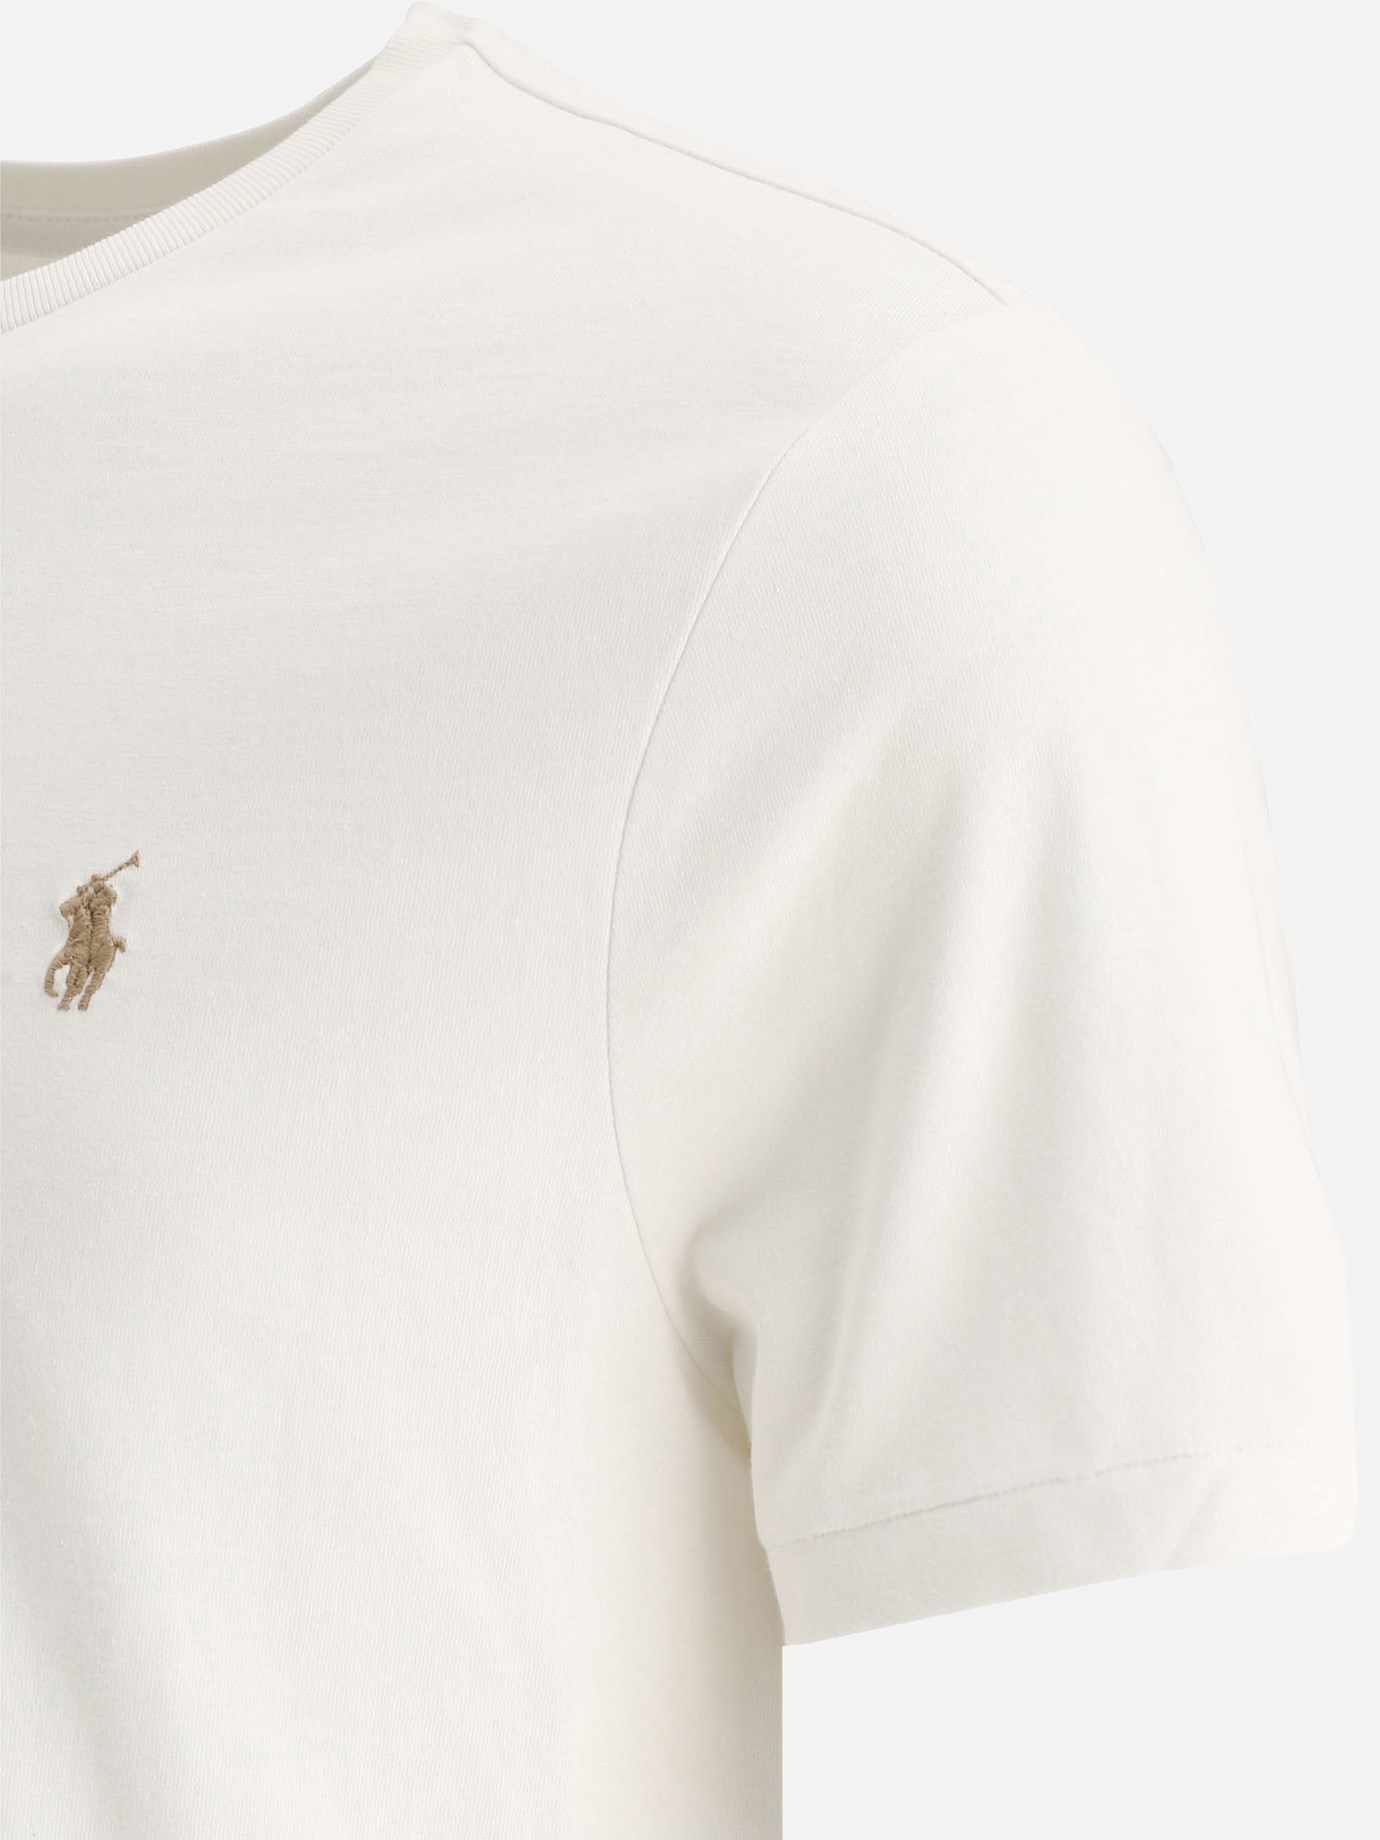 T-shirt  Pony  by Polo Ralph Lauren